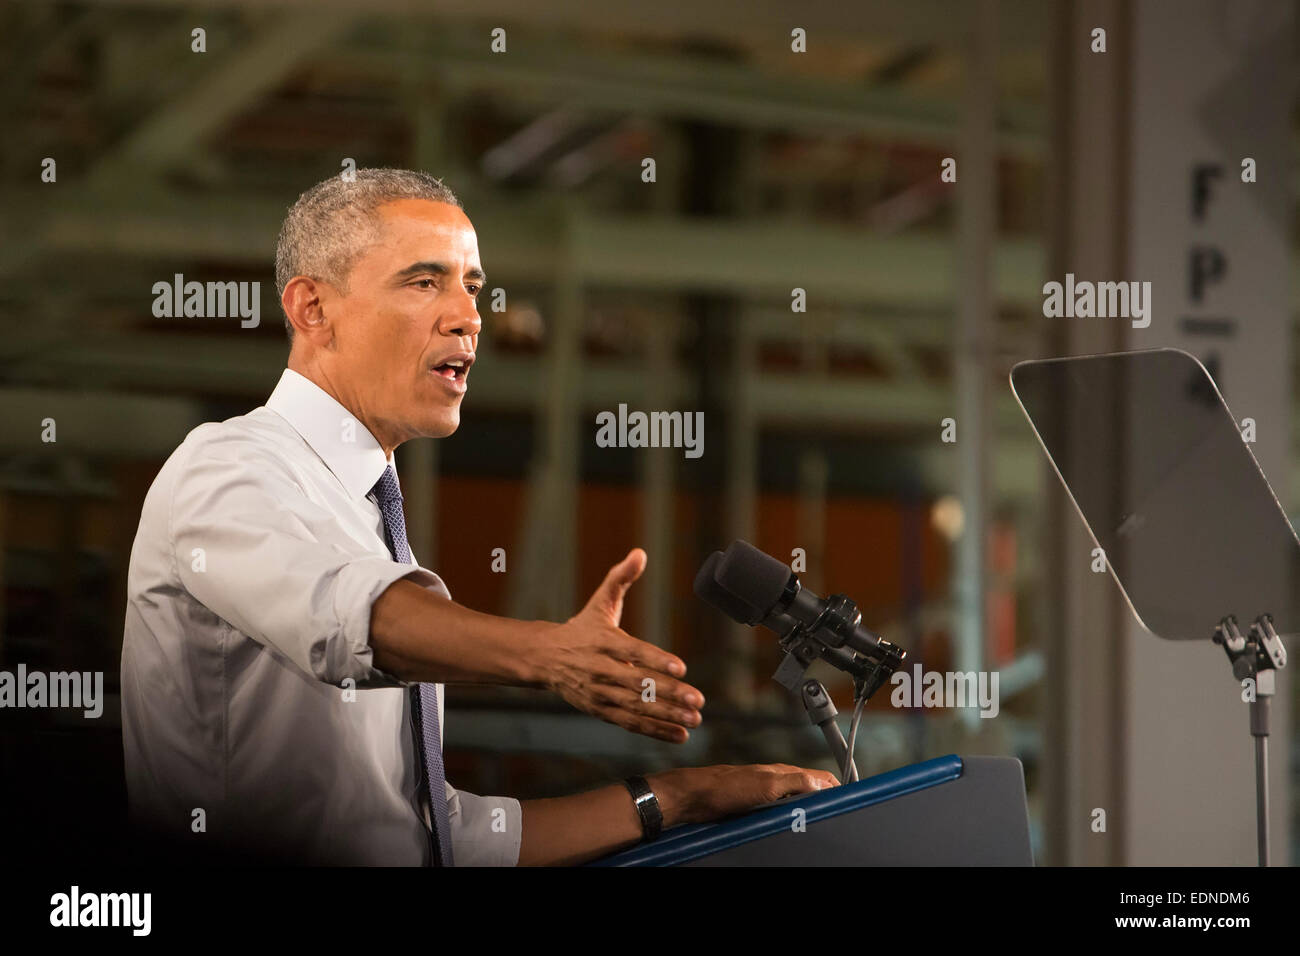 Wayne, Michigan, USA. President Barack Obama speaks at Ford's Michigan Assembly Plant. Obama celebrated car manufacturers' resurgence since the 2009 government bailout of the auto industry. Credit:  Jim West/Alamy Live News Stock Photo